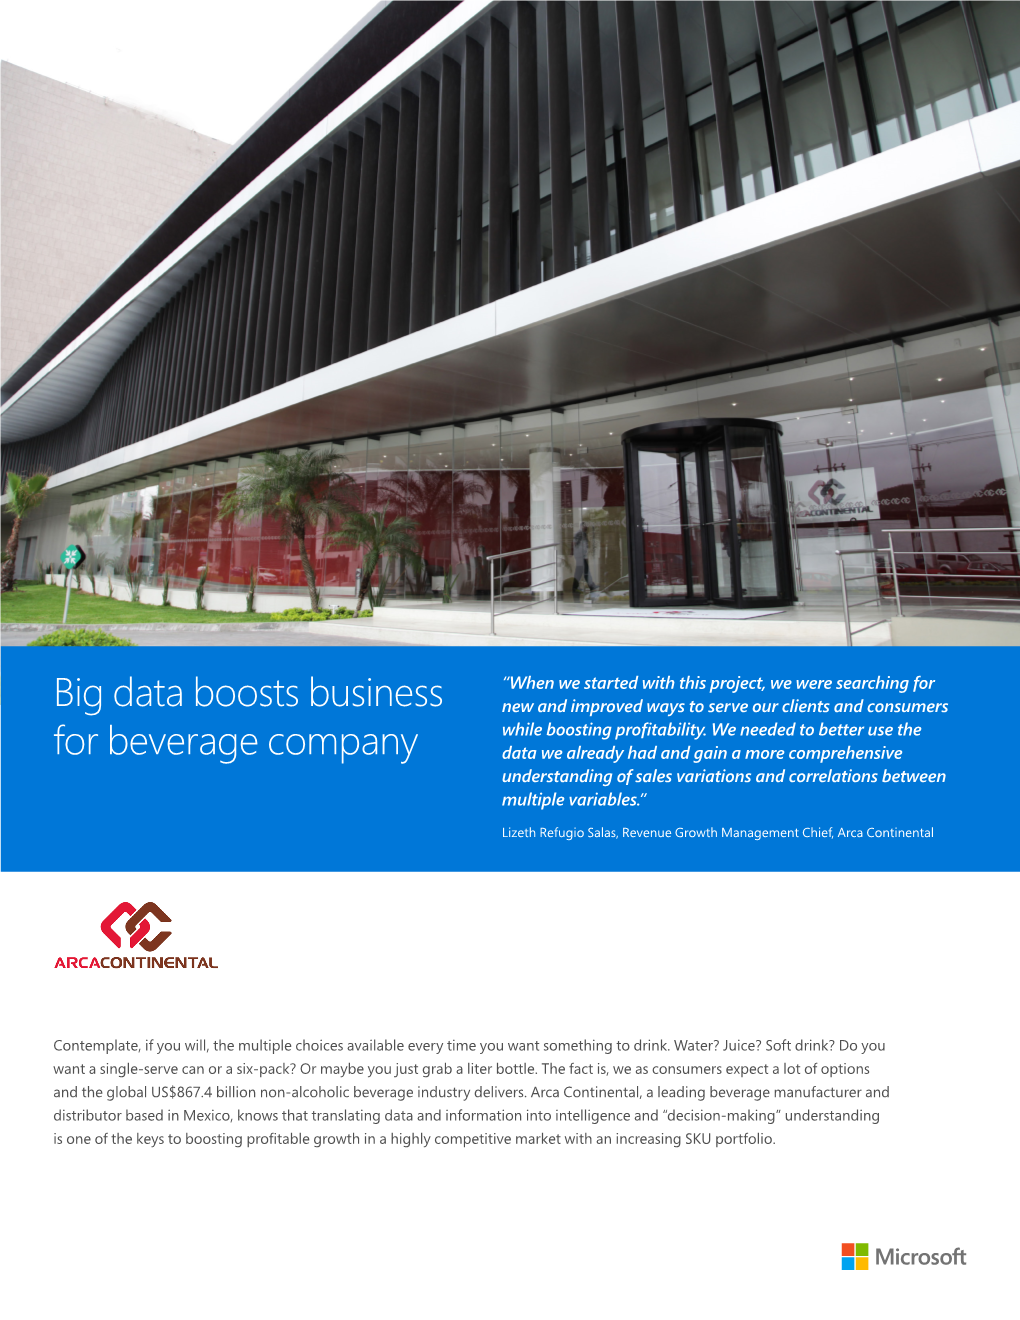 Big Data Boosts Business for Beverage Company